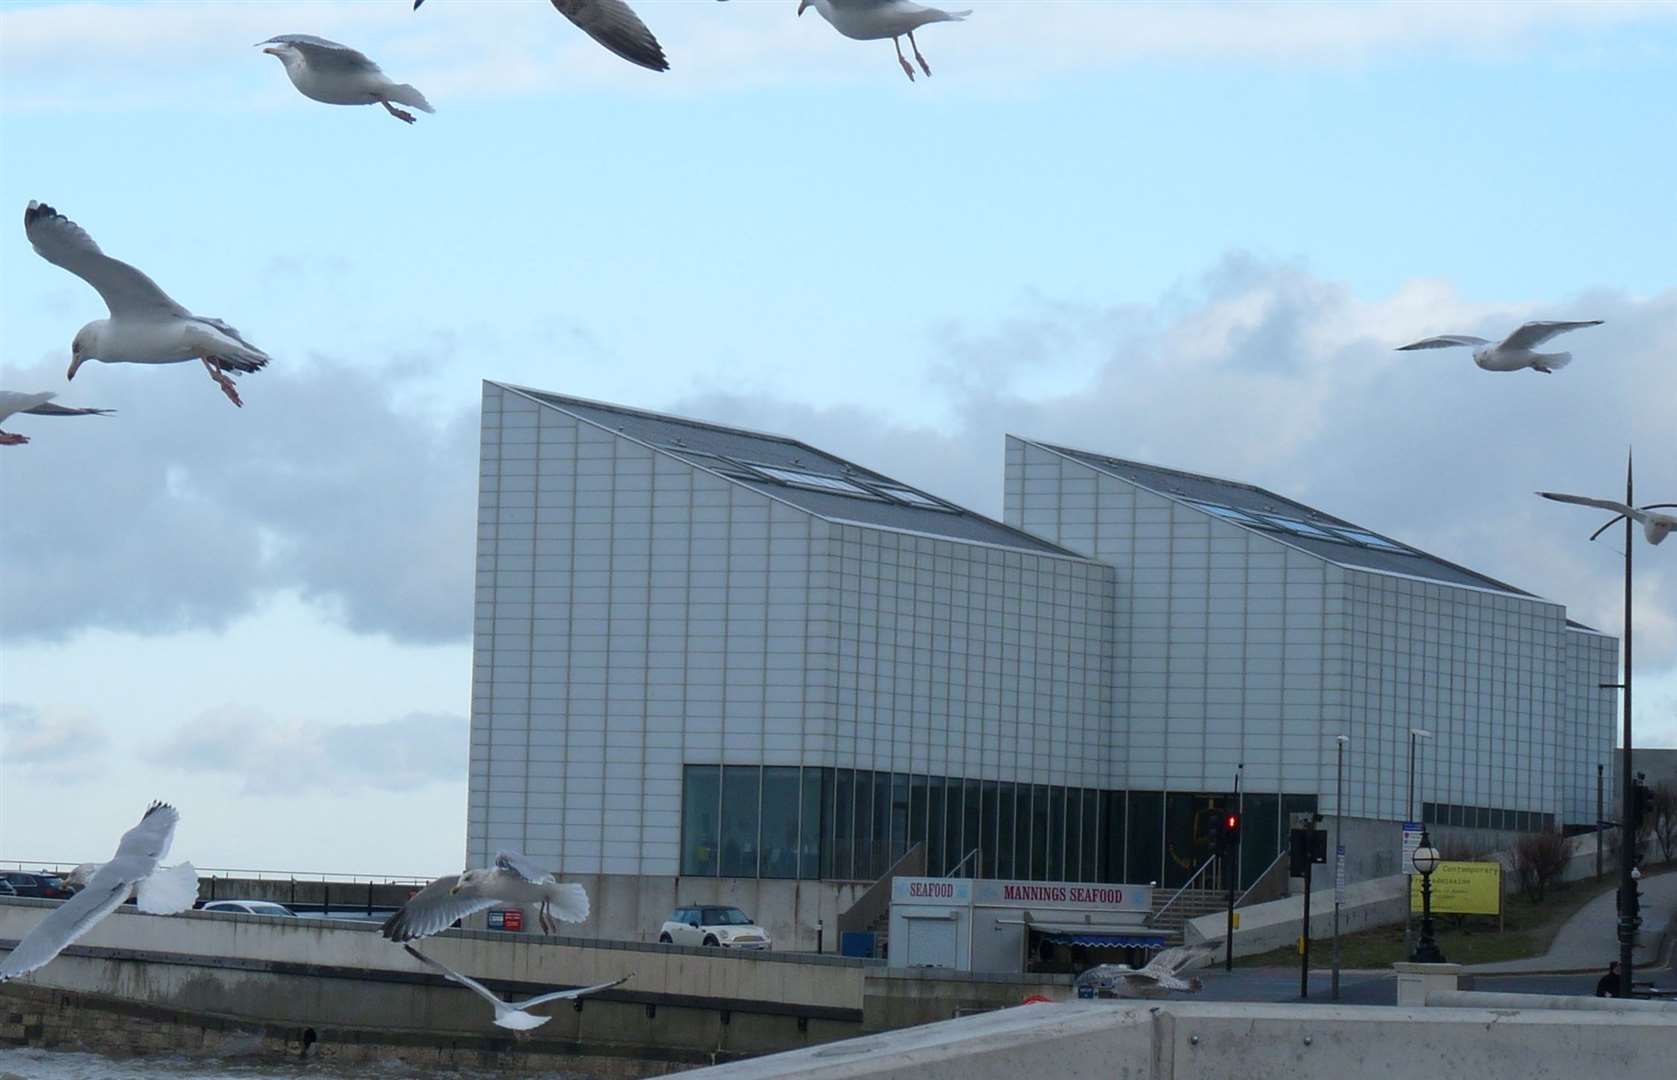 The Turner Contemporary acted as the town's catalyst for regeneration